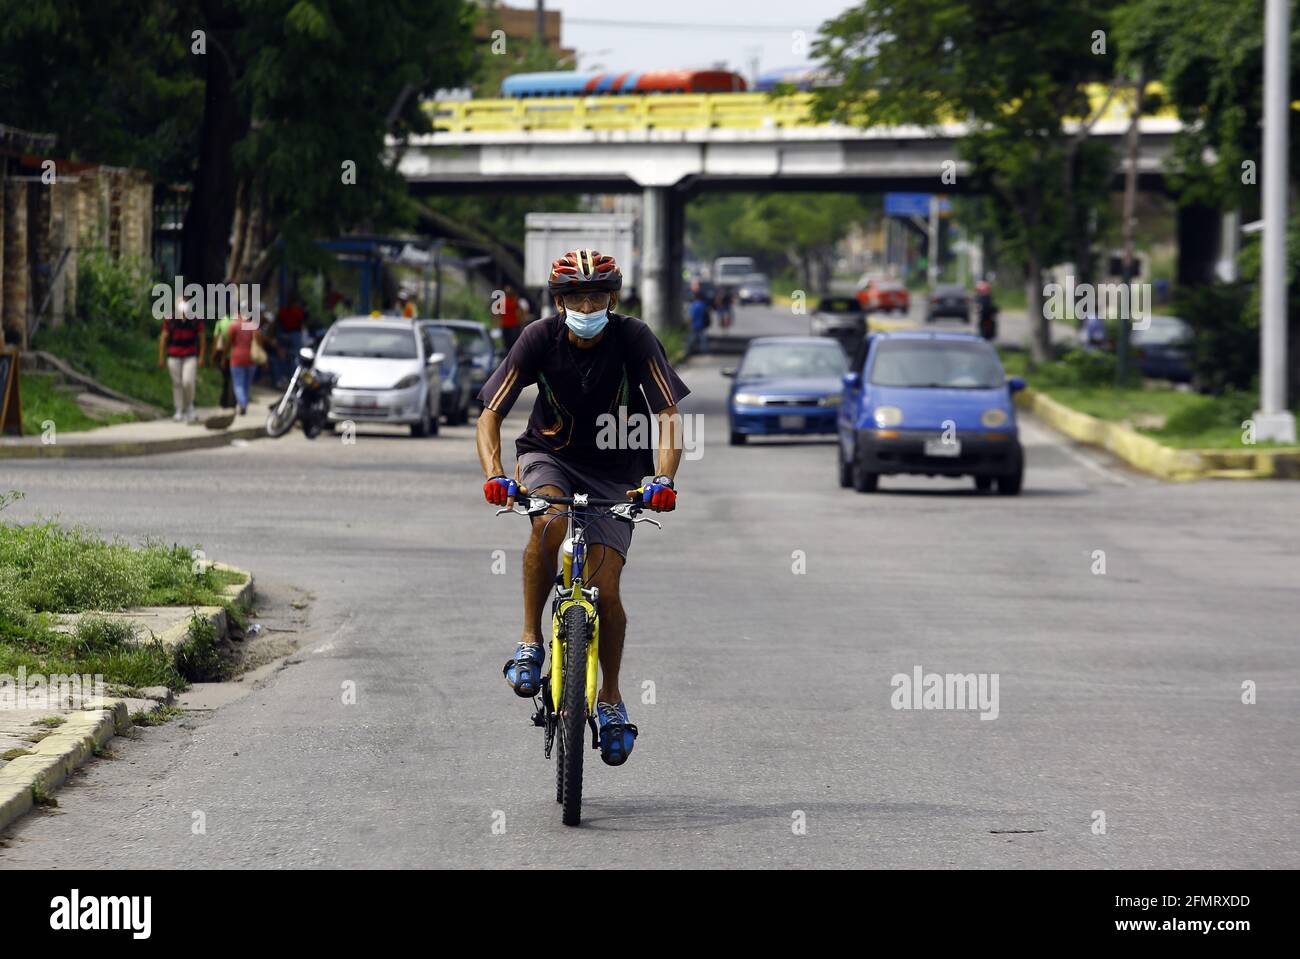 Valencia, Carabobo, Venezuela. 11th May, 2021. May 11, 2021. A man, wearing a face mask, rides a bicycle in the entrance area of Naguanagua, Carabobo state. Photo: Juan Carlos Hernandez Credit: Juan Carlos Hernandez/ZUMA Wire/Alamy Live News Stock Photo